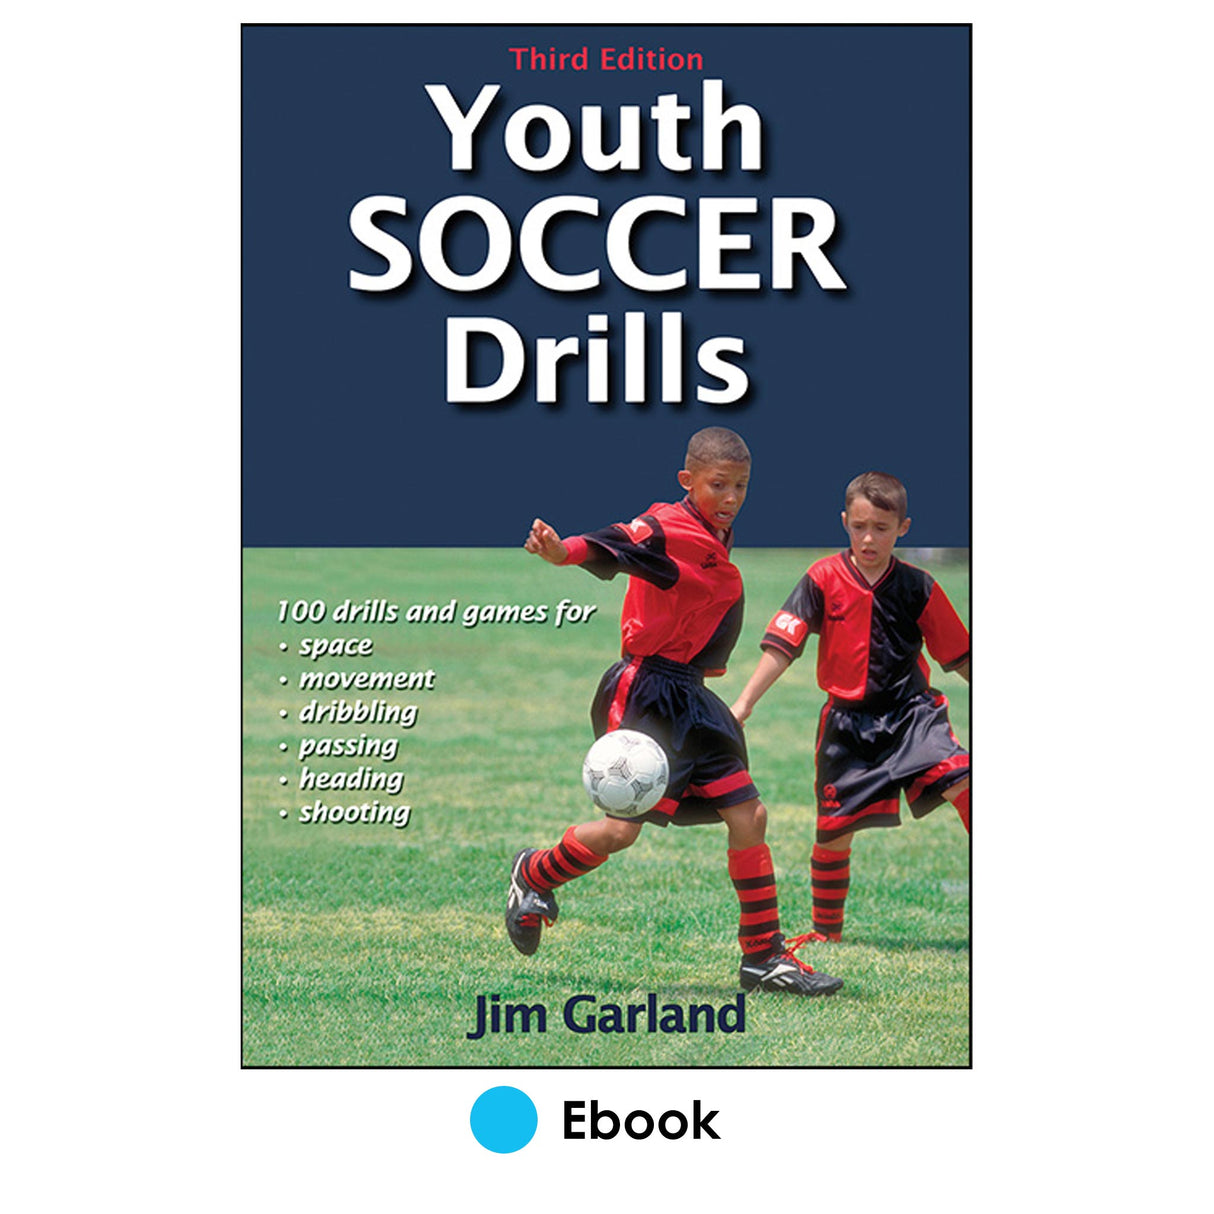 Youth Soccer Drills 3rd Edition PDF